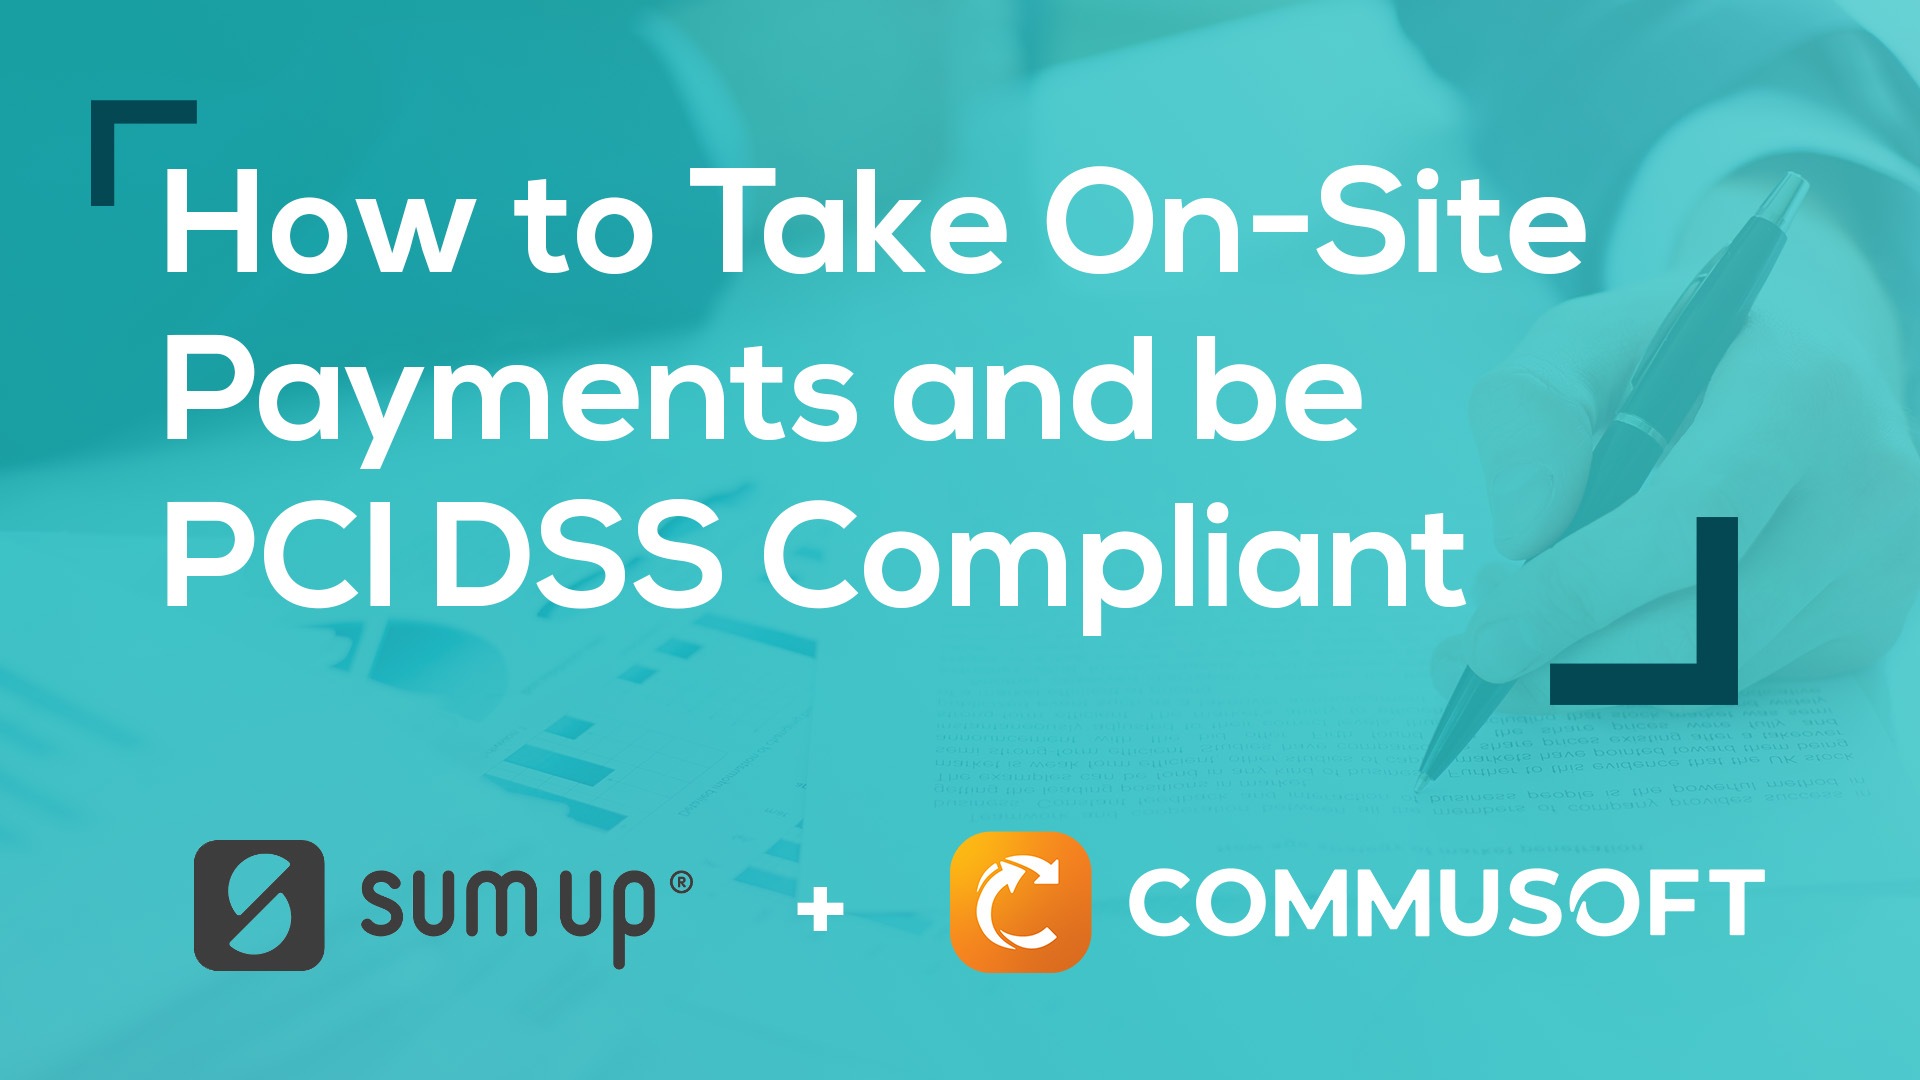 How to Take On-Site Payments and be PCI DSS Compliant